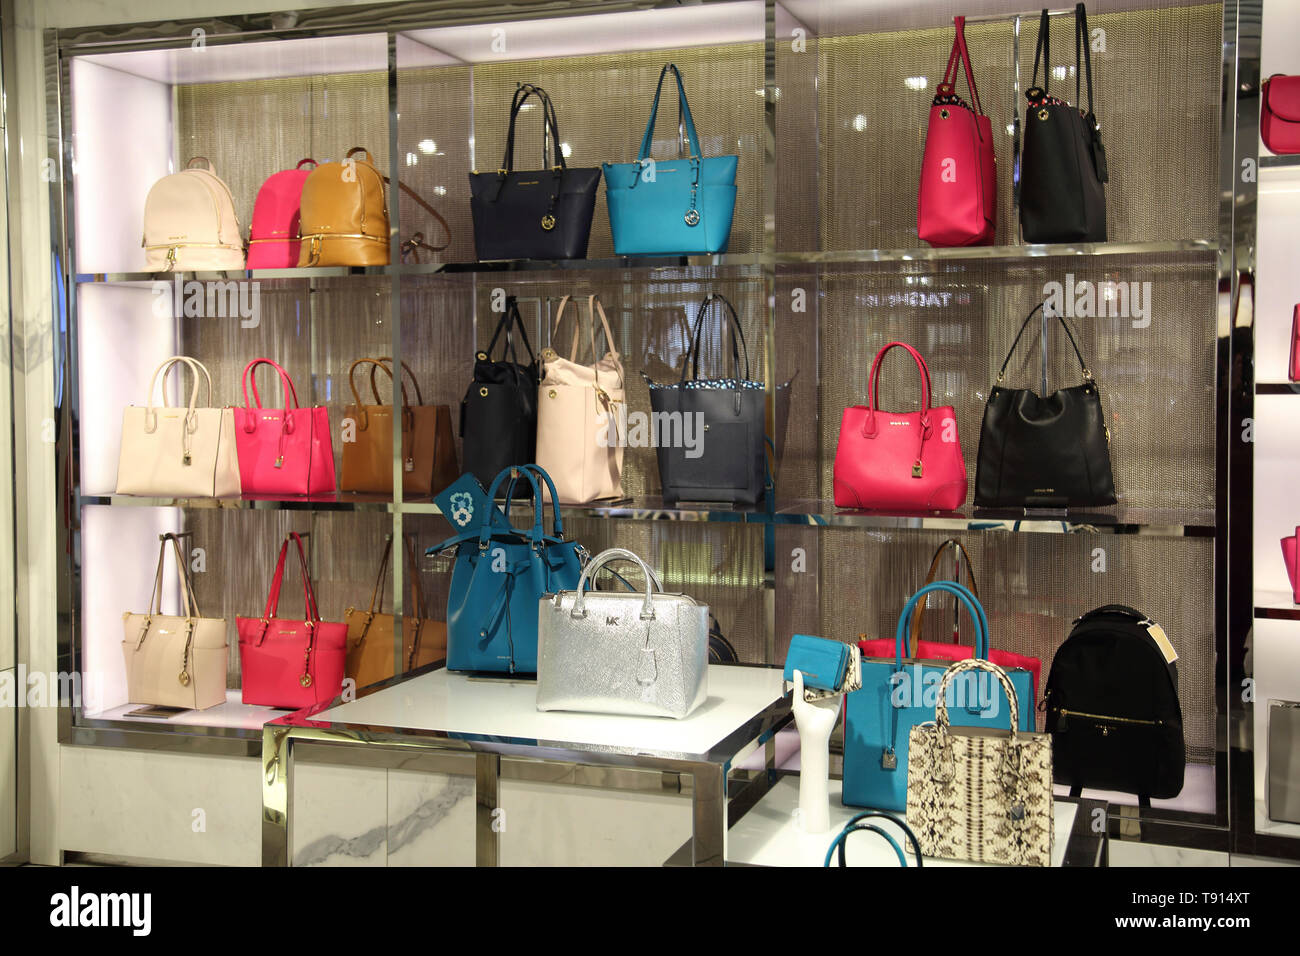 Athens Greece Athens Airport Handbags on sale in Duty Free Stock Photo ...